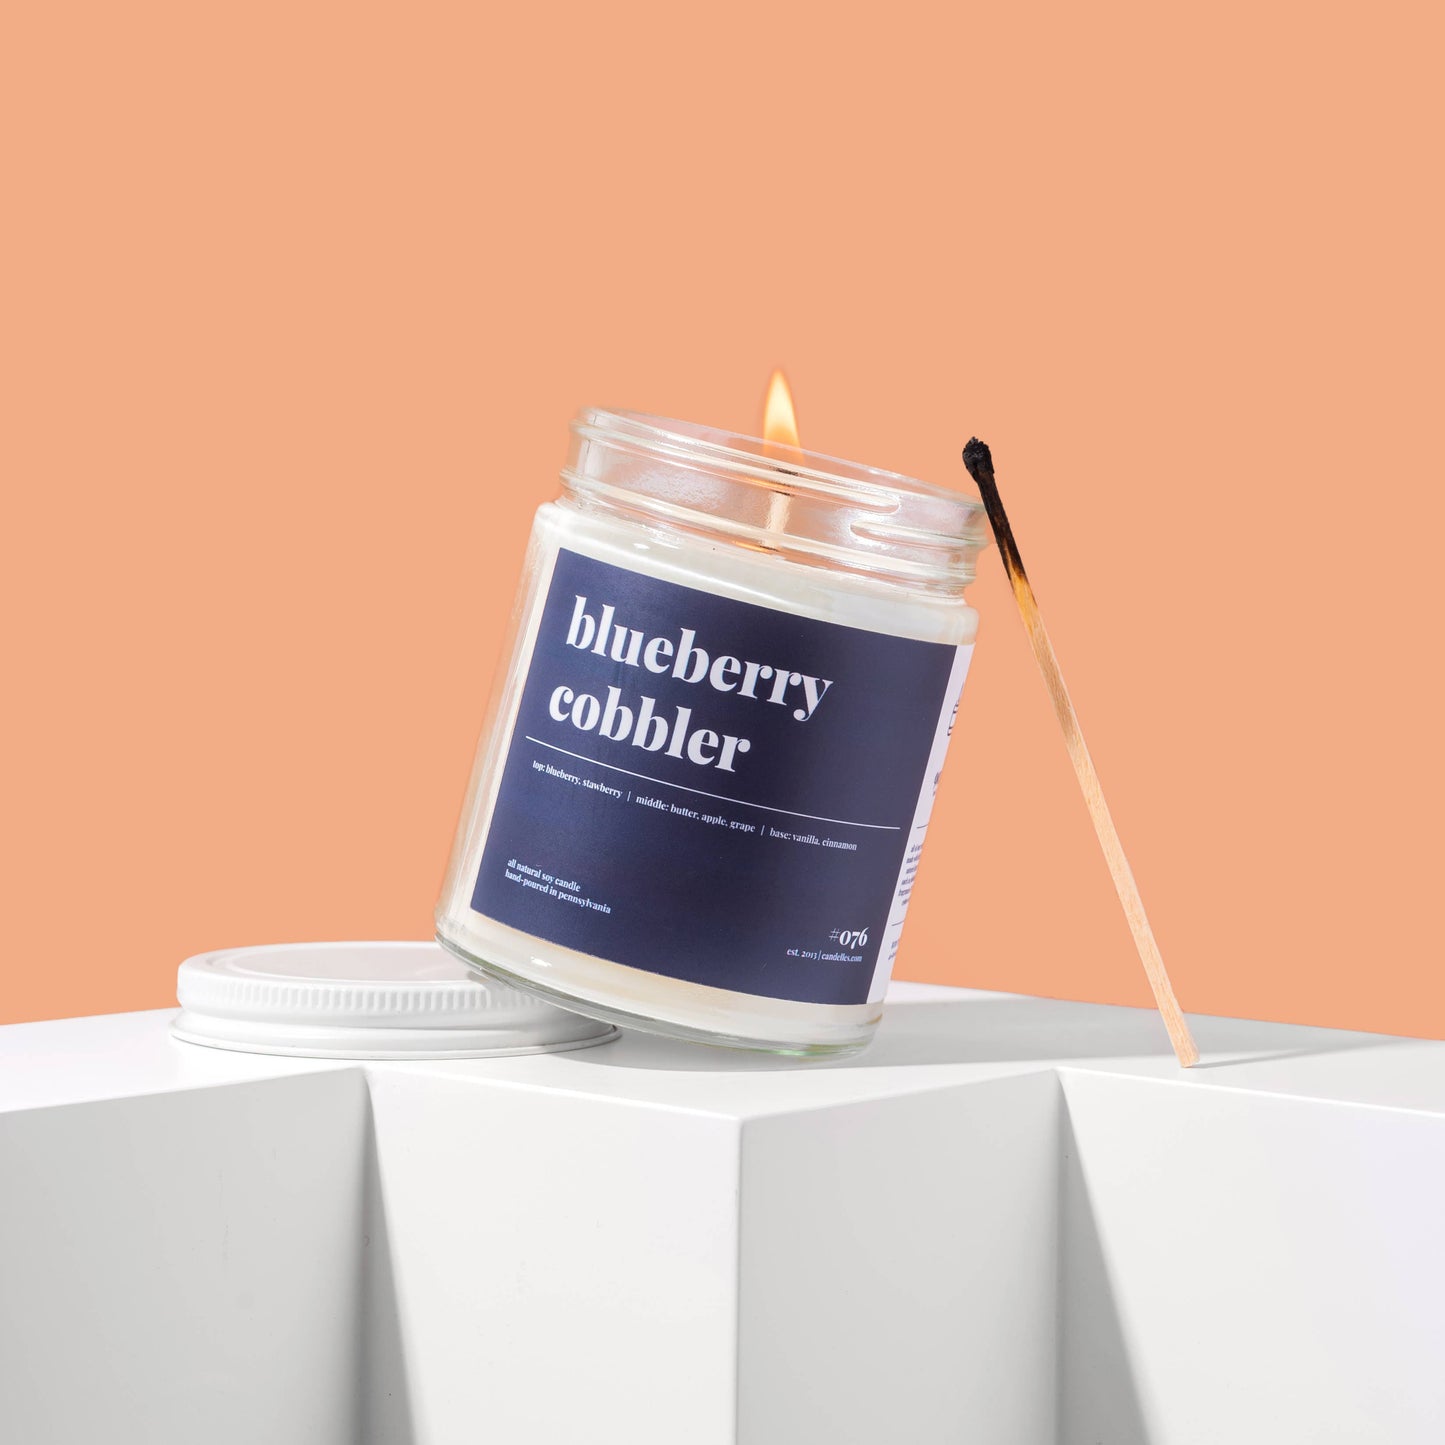 Blueberry Cobbler Scented Soy Candle - 9oz